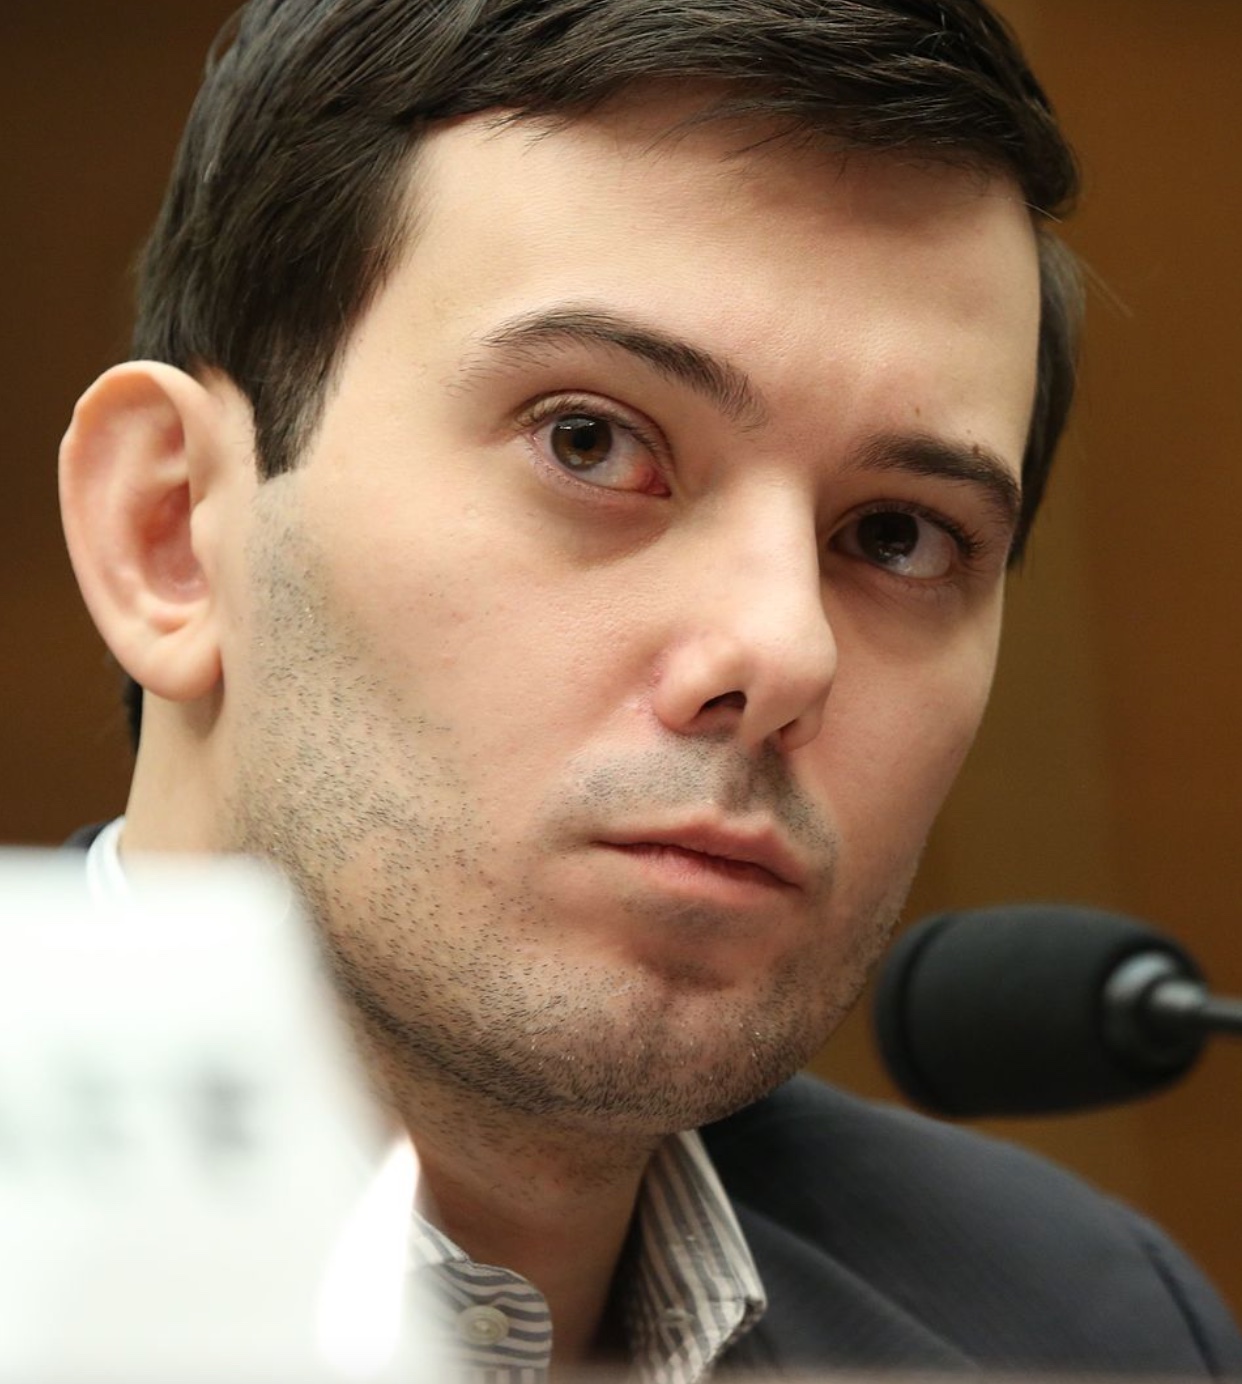 Martin Shkreli testifying before the House Committee on Oversight and Government Reform, 2016. Image by House Committee on Oversight and Government Reform, Public domain, via Wikimedia Commons.